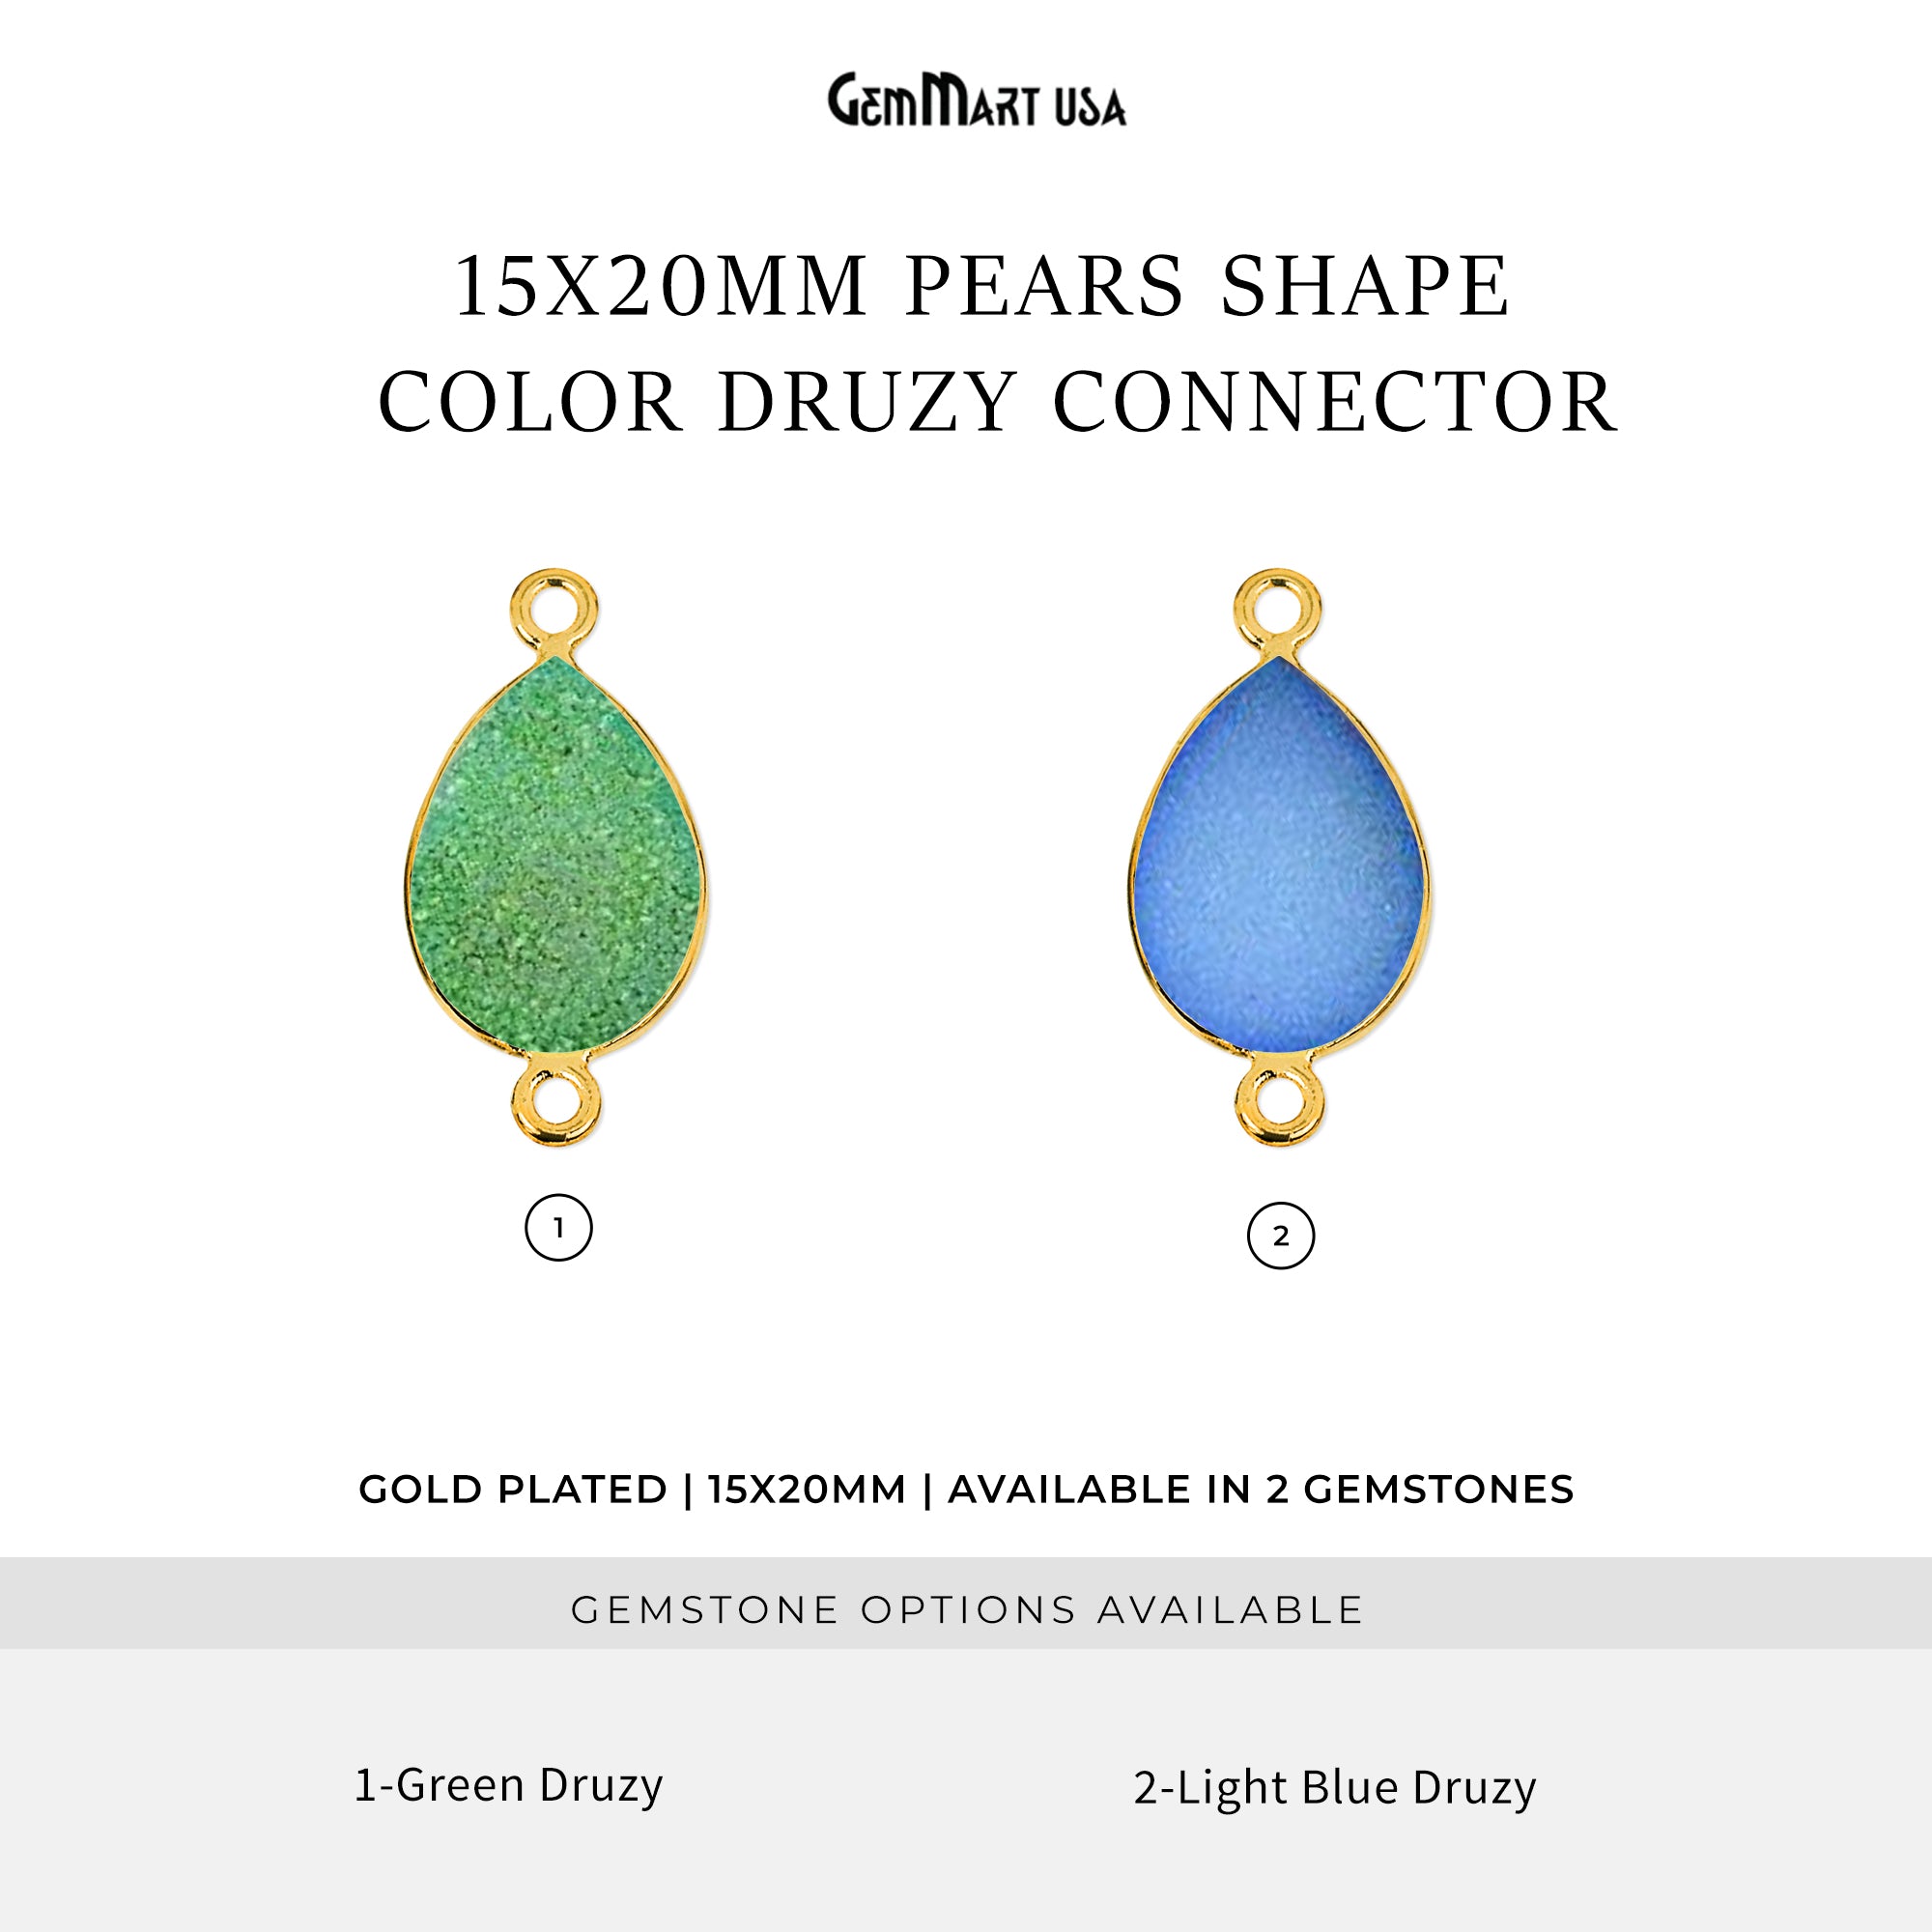 Color Druzy 15x20mm Pears Bezel Gold Plated Double Bail Gemstone Connector